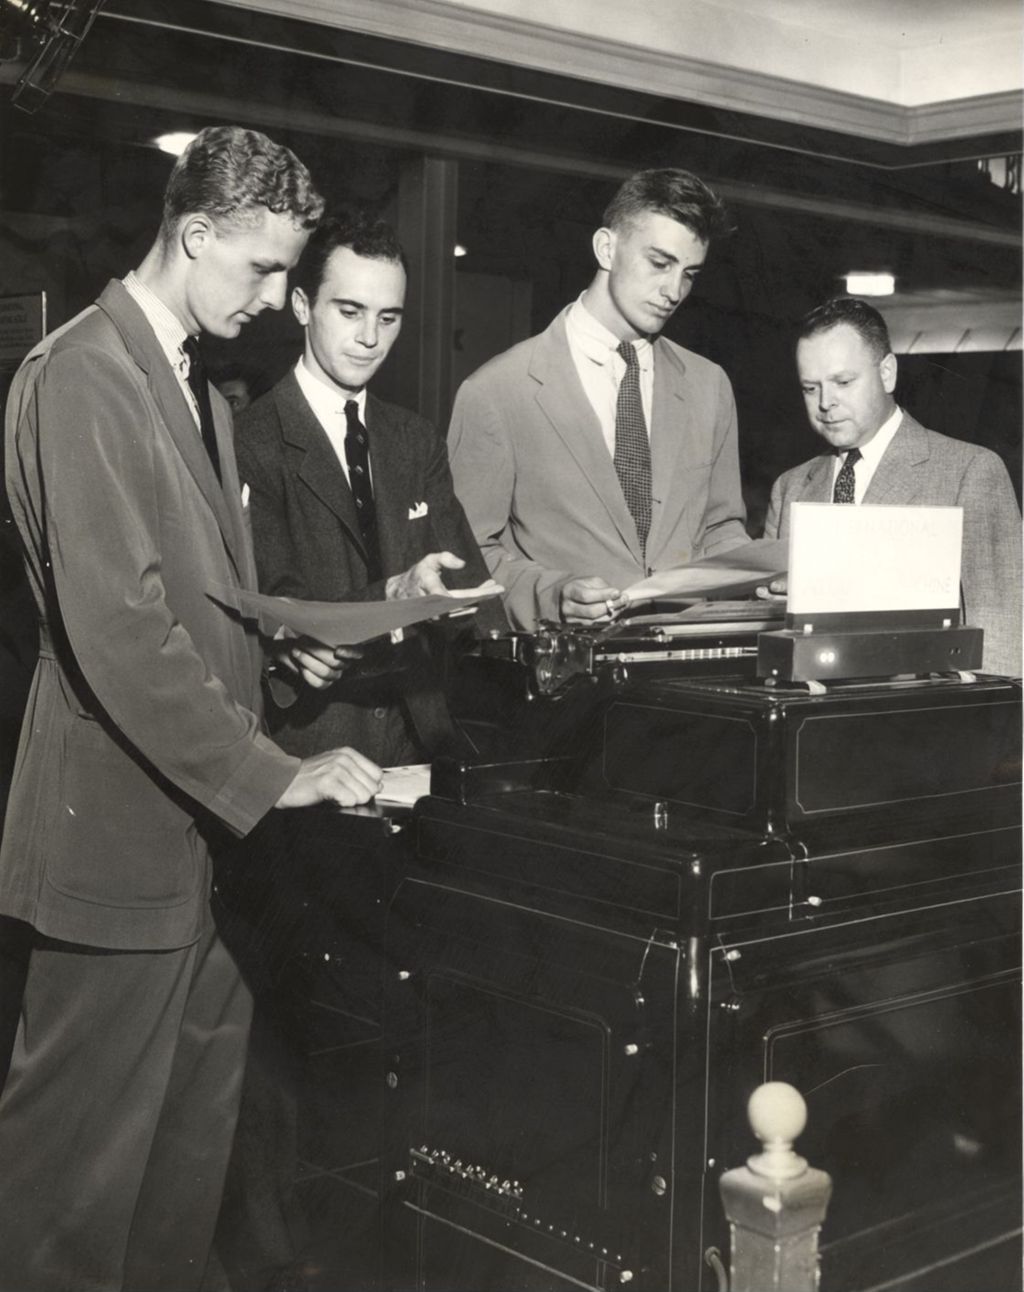 Franklin D. Roosevelt, Jr. inspects a report at the International Business machines exhibit